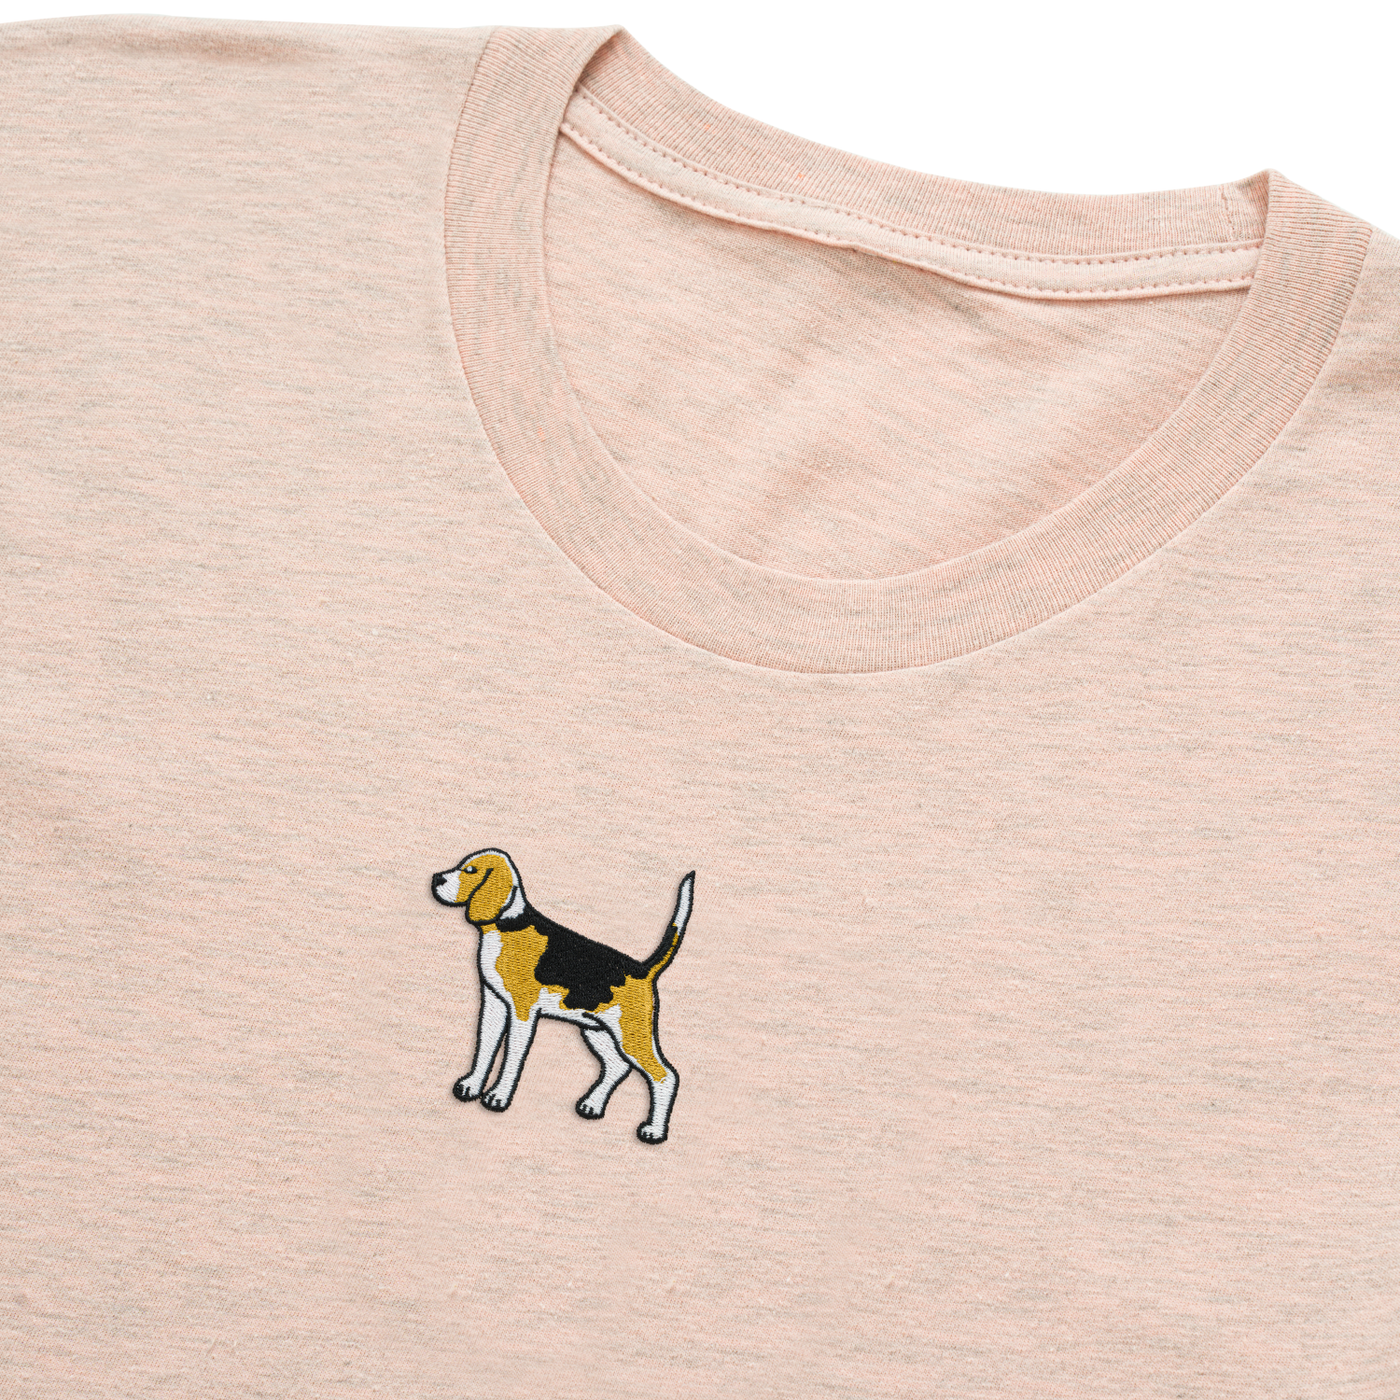 Bobby's Planet Women's Embroidered Beagle T-Shirt from Paws Dog Cat Animals Collection in Heather Prism Peach Color#color_heather-prism-peach